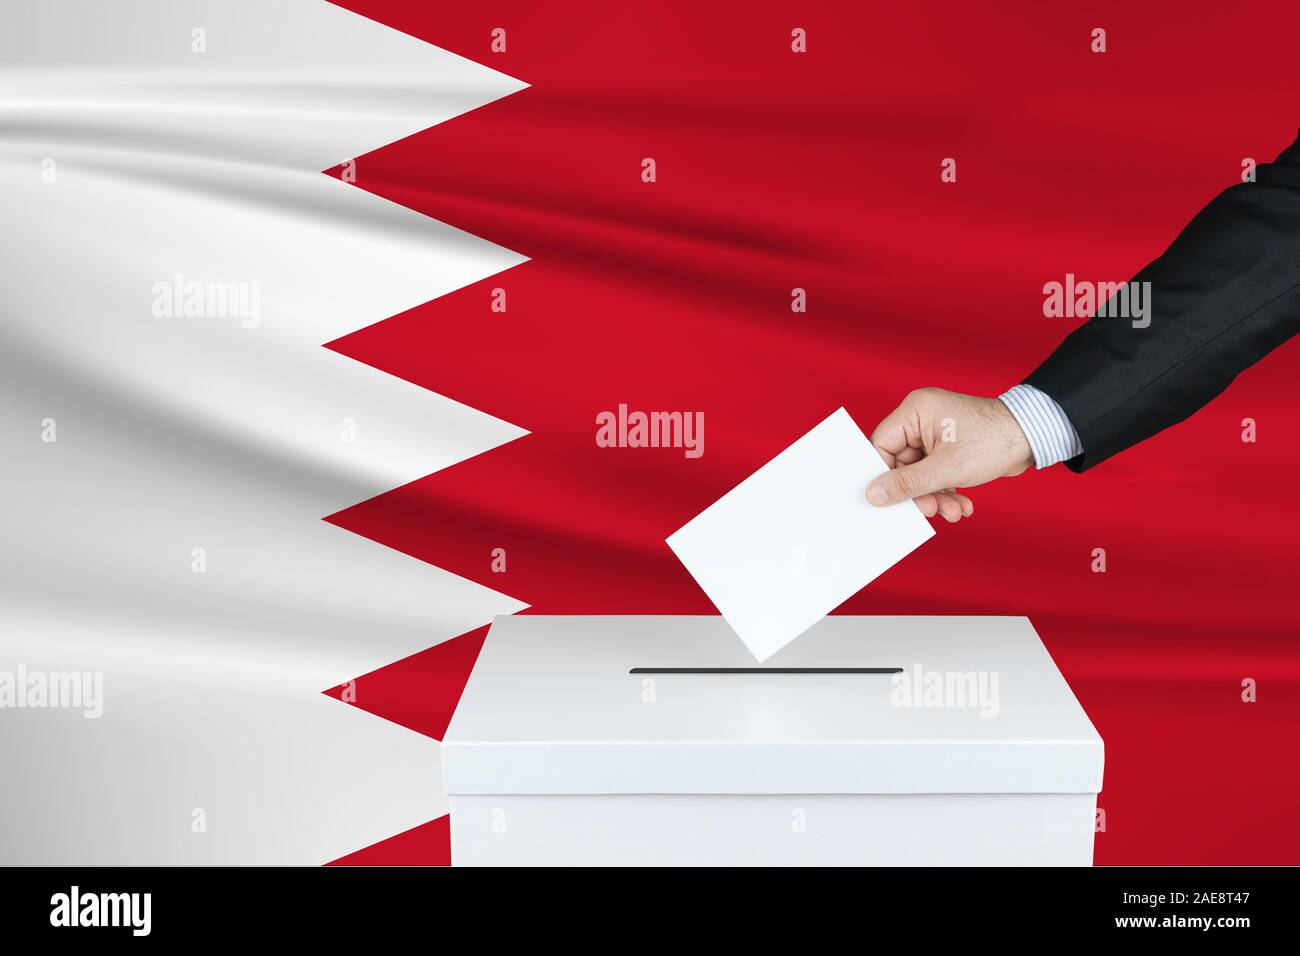 Election in Bahrain. The hand of man putting his vote in the ballot box. Waved Bahrain flag on background. Stock Photo